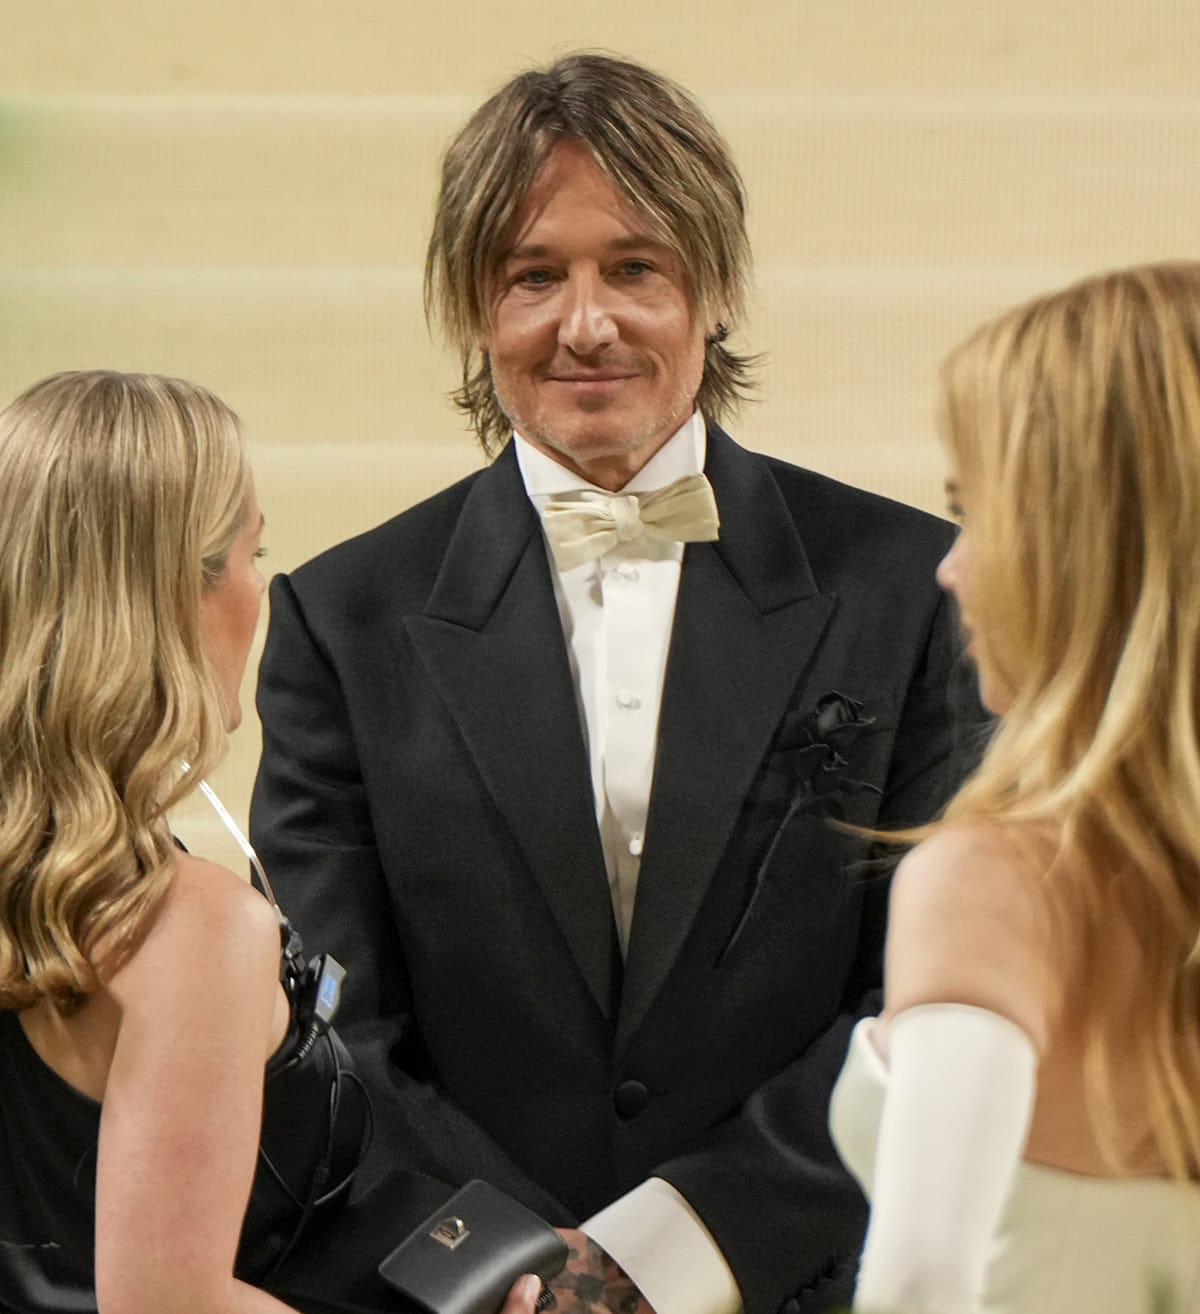 Keith Urban complements his wife in a black-and-white tuxedo suit with a black rose as a nod to the evening's theme